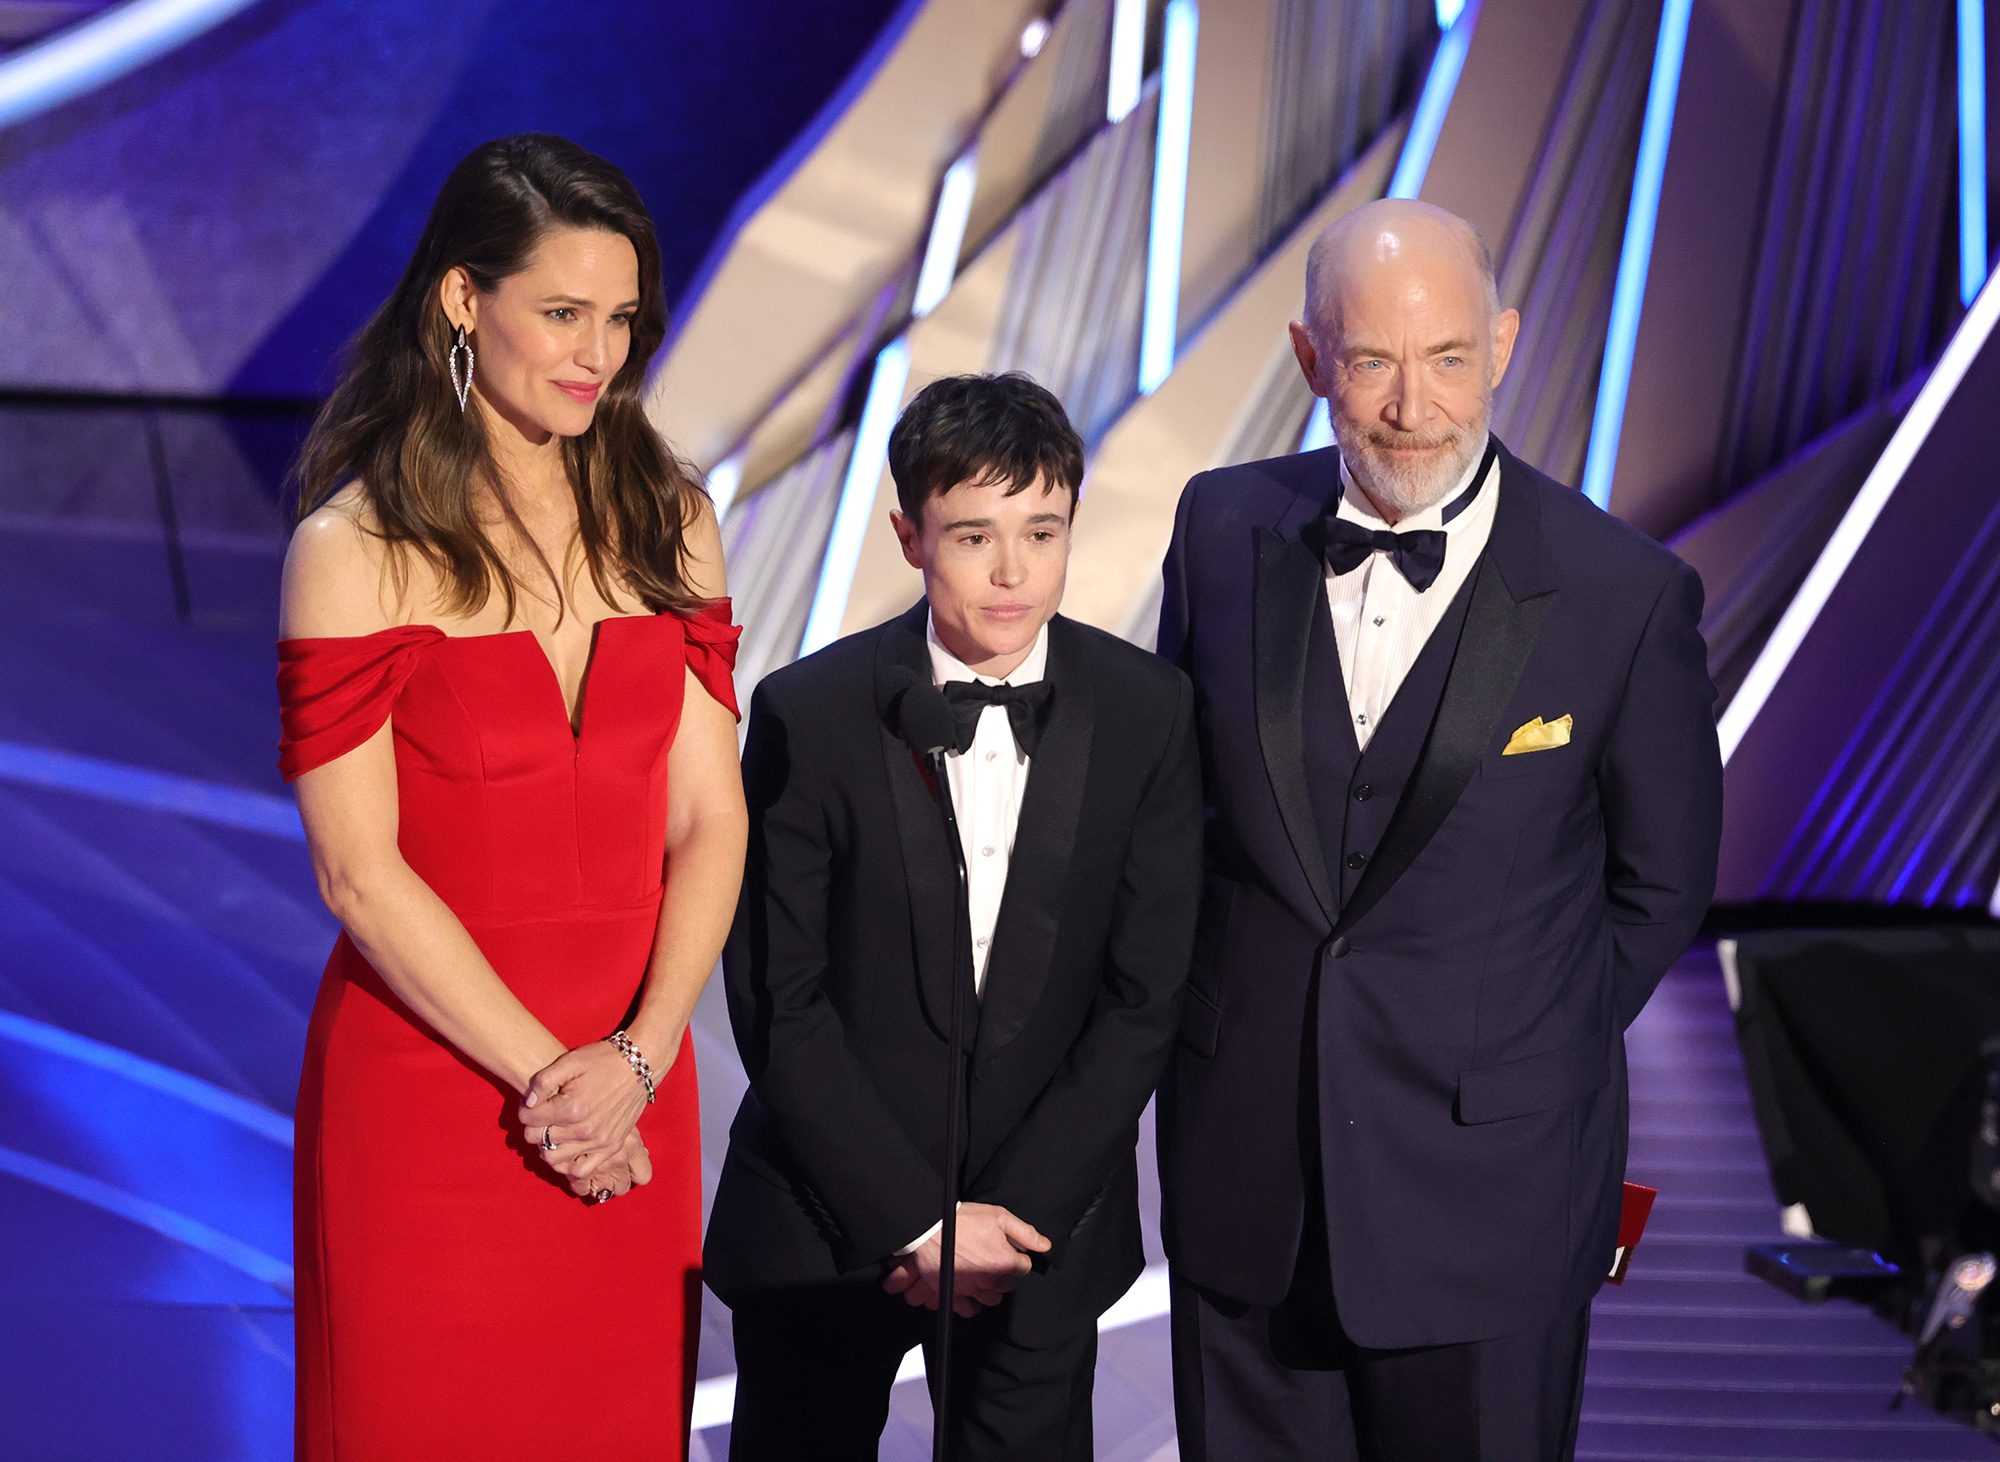 From left: Jennifer Garner, Elliot Page, and J.K. Simmons speak onstage during the 94th Annual Academy Awards.